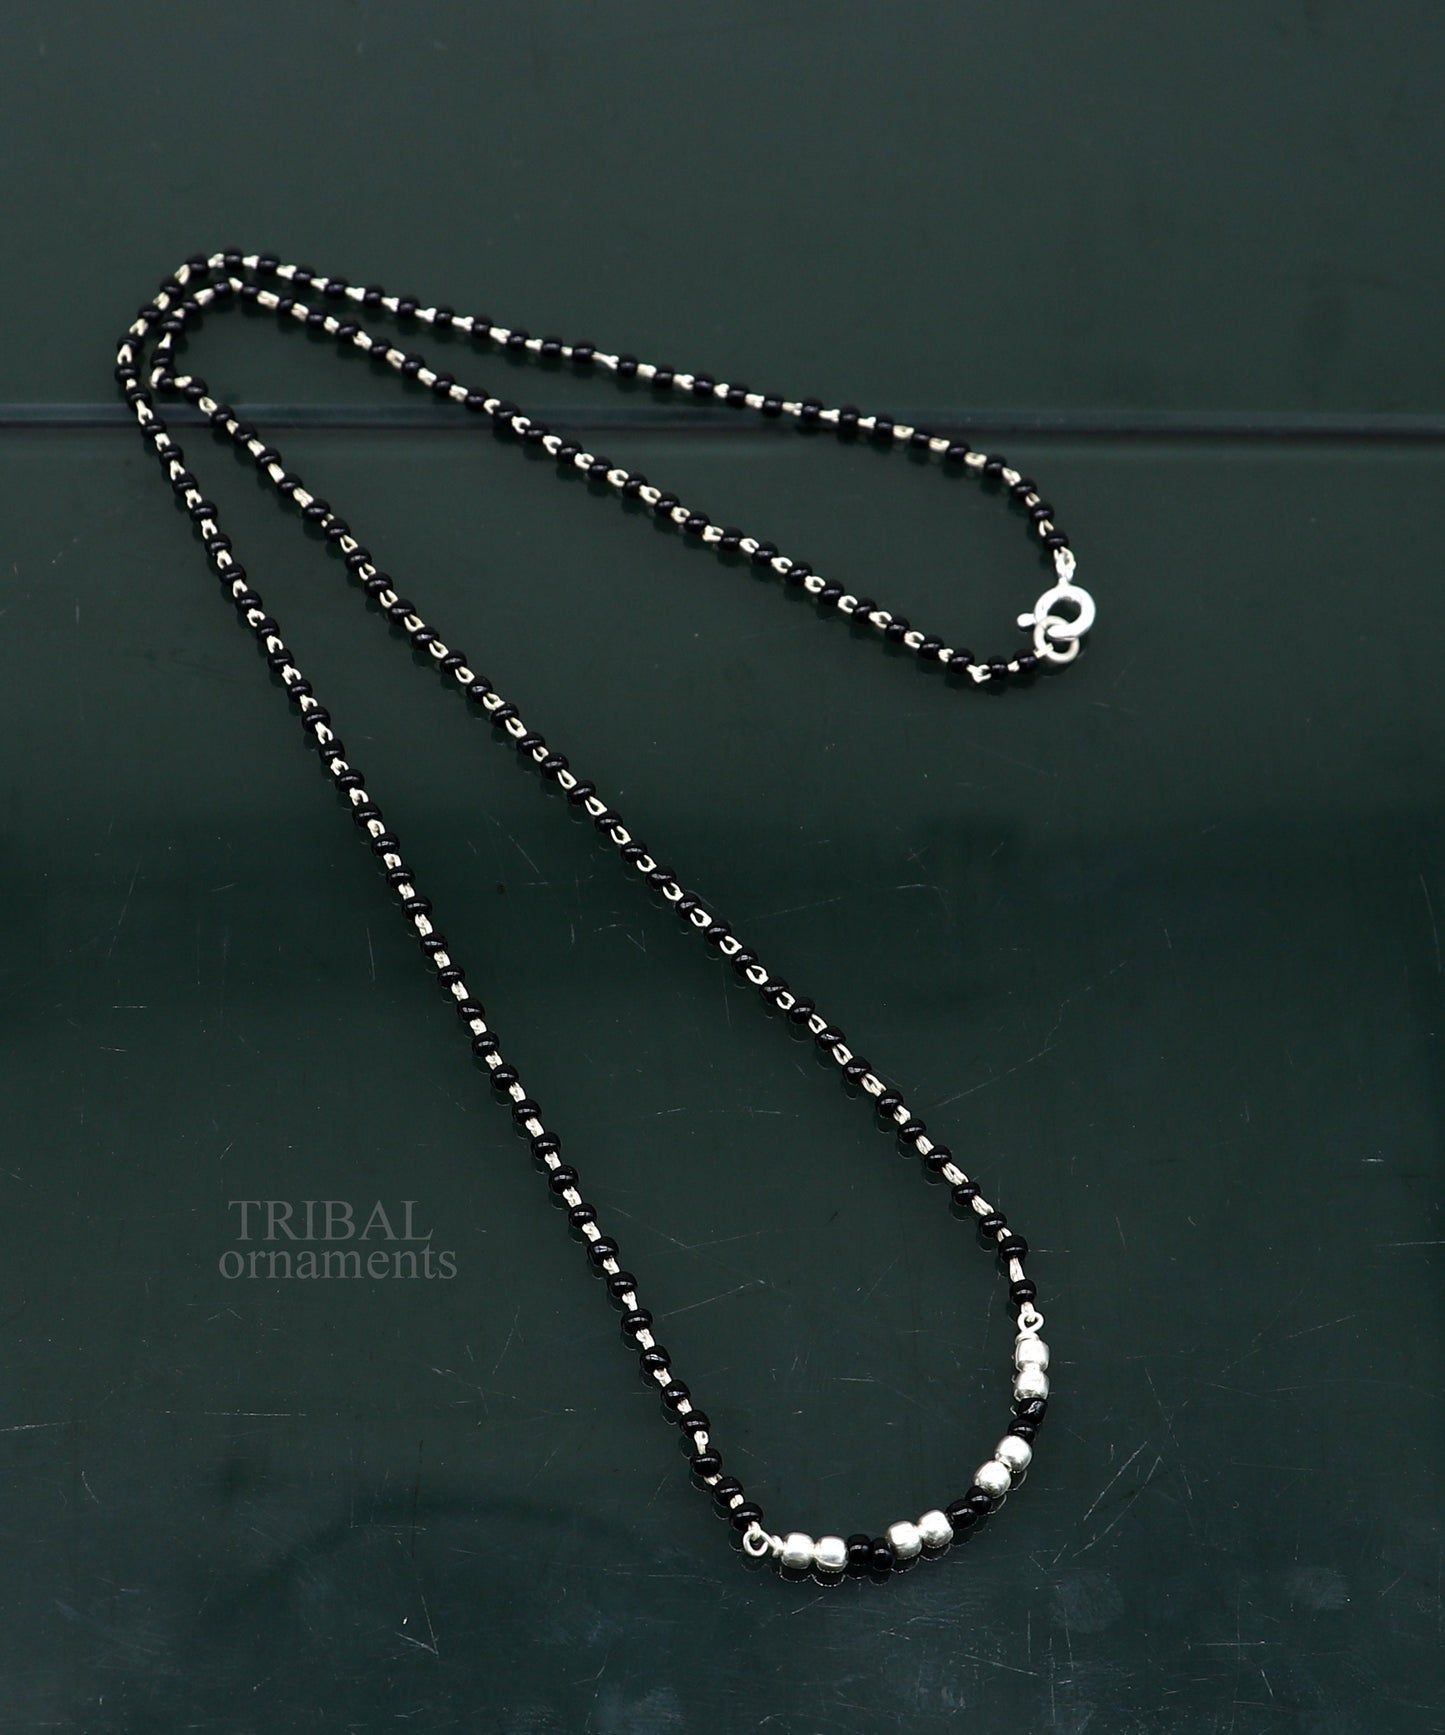 Elegant 925 sterling silver black beads chain necklace, gorgeous small stone design pendant, Mangalsutra chain beaded necklace set327 - TRIBAL ORNAMENTS